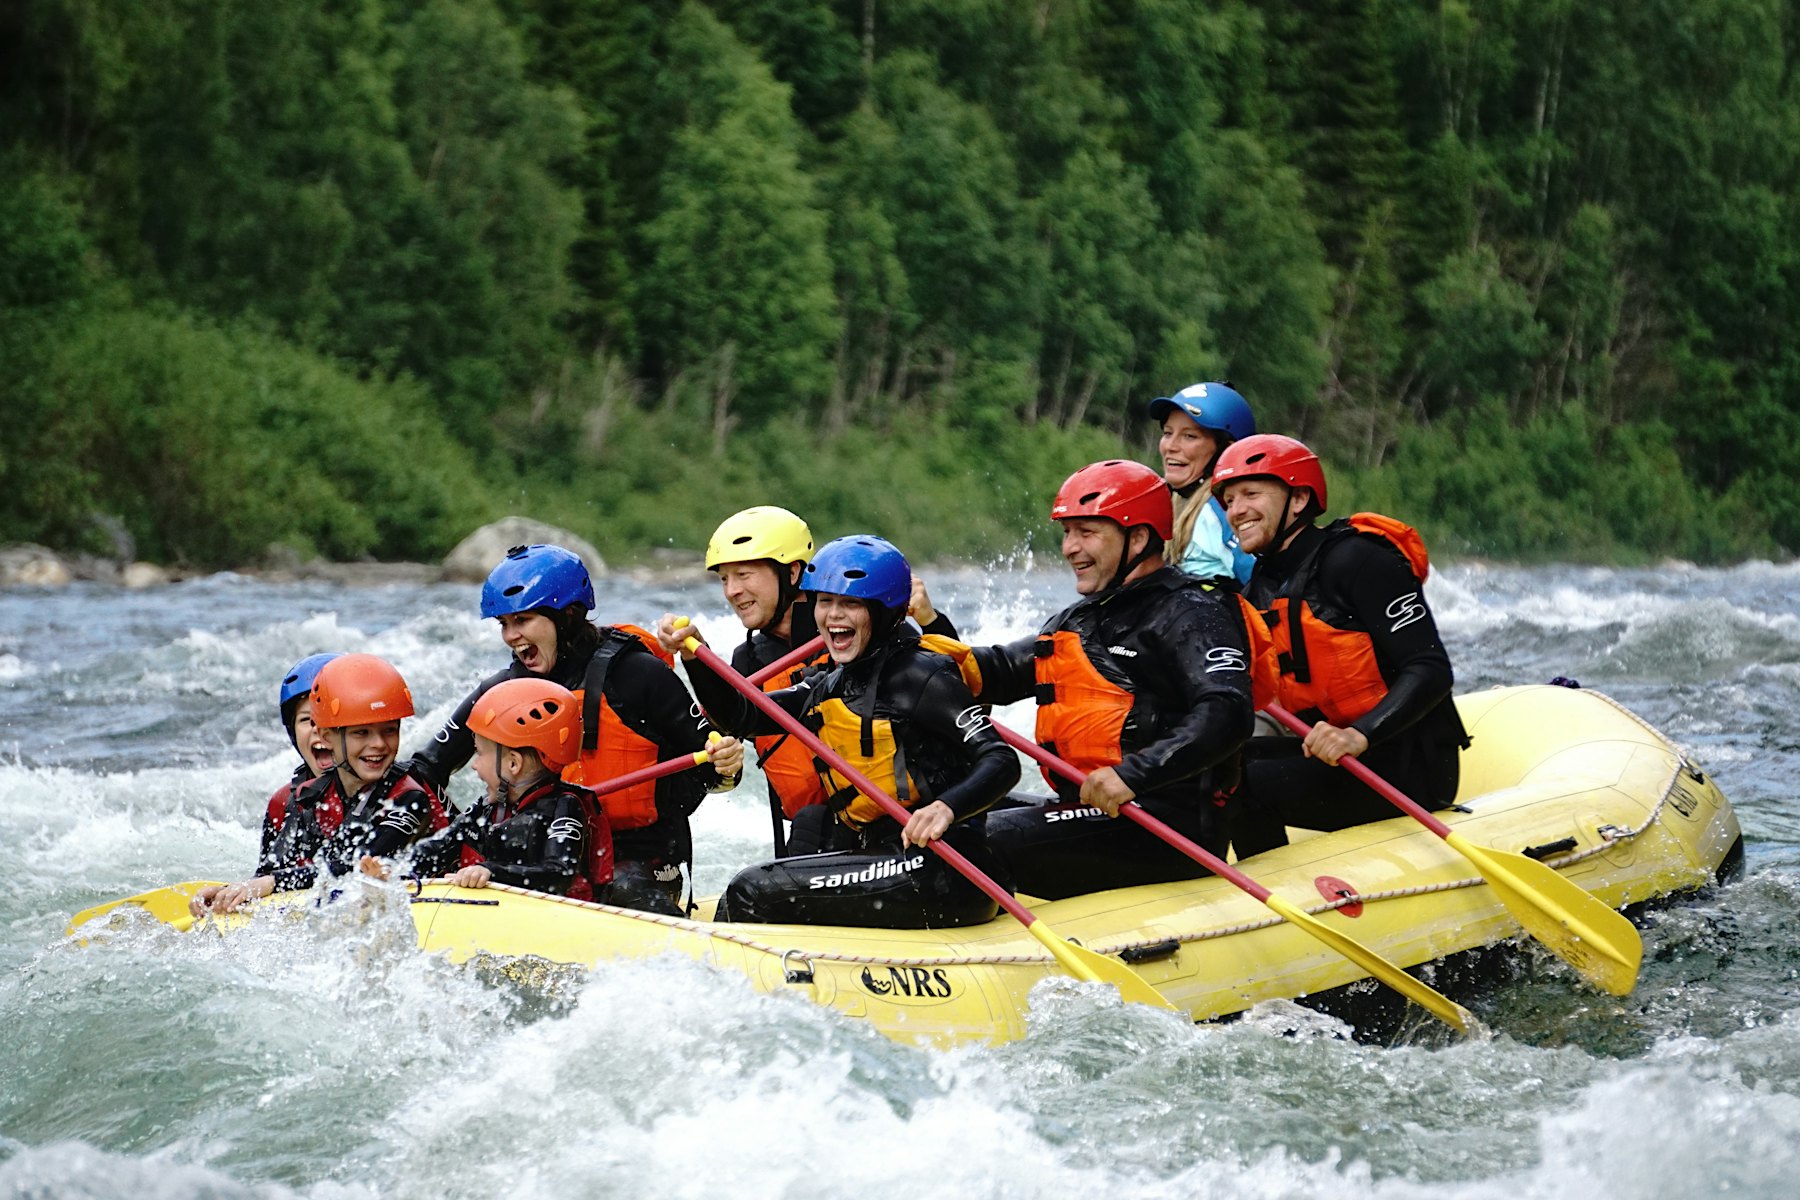 Large group sitting in a boat and rafting in a river while laughing and smiling. Photo